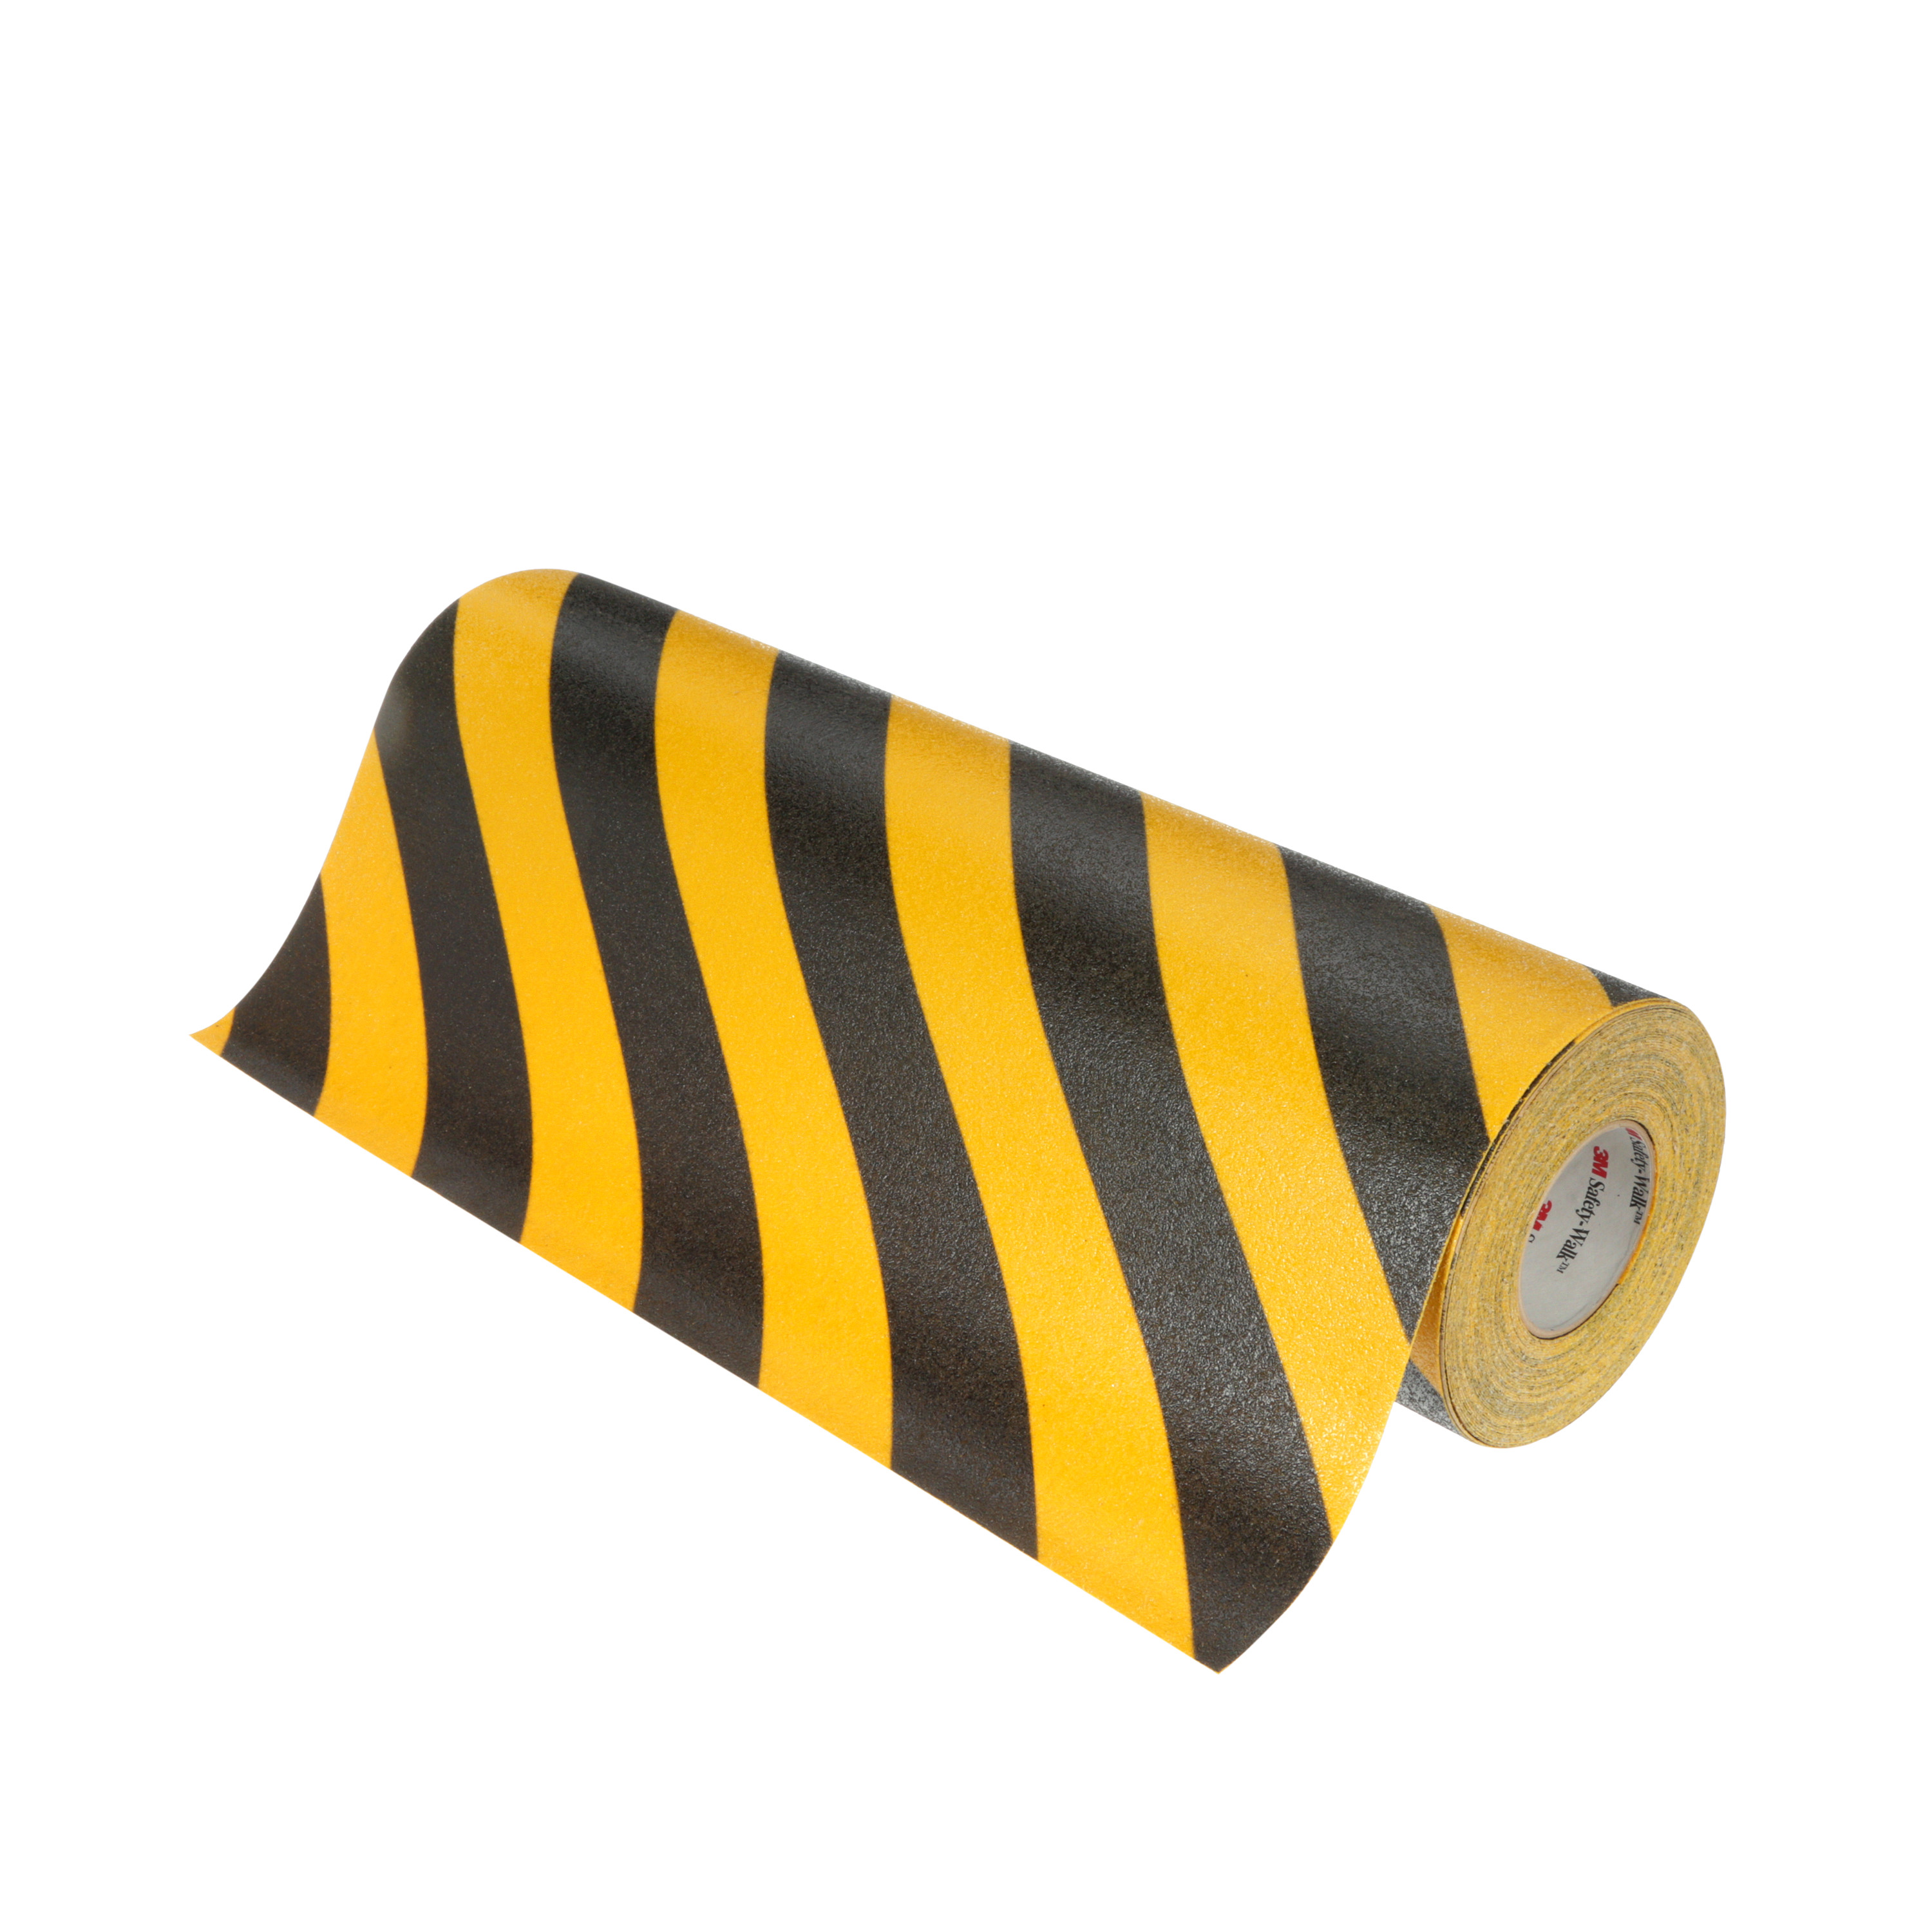 3M™ Safety-Walk™ Slip-Resistant General Purpose Tapes & Treads 613, Black/Yellow Stripe, 3 in x 60 ft, Roll, 1/Case